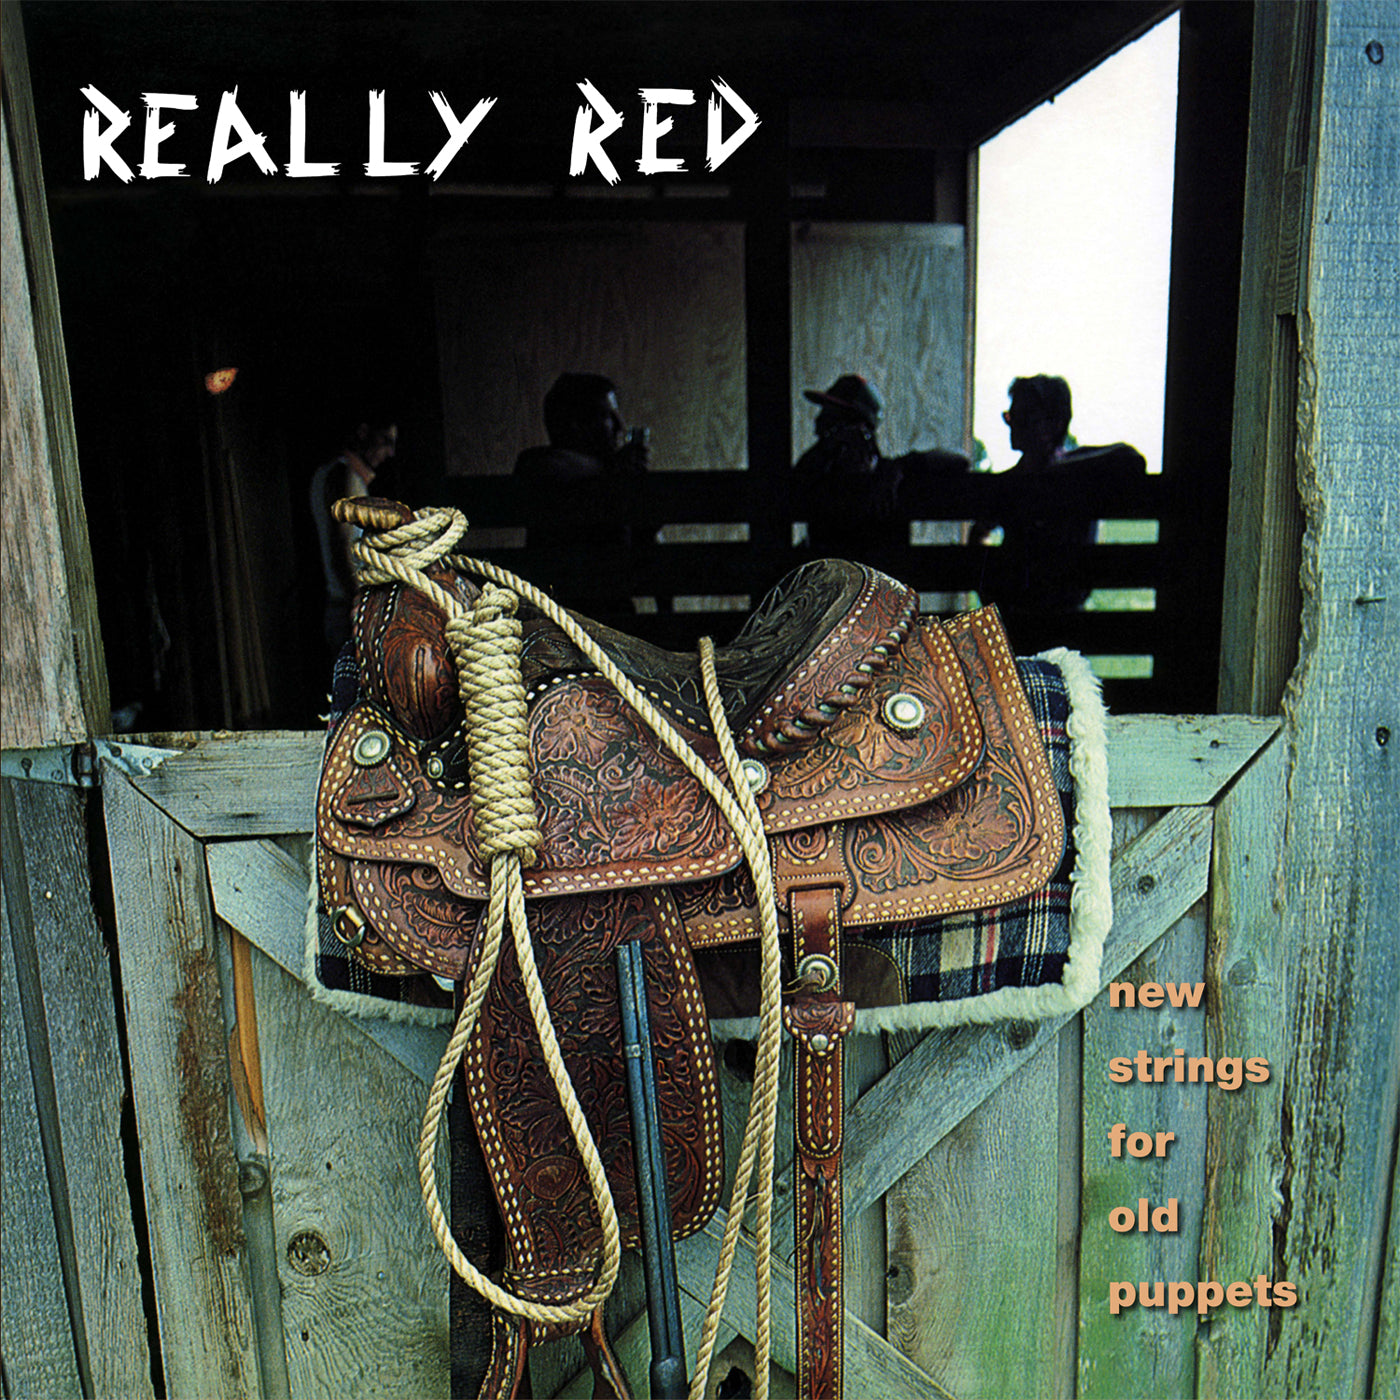 v456 - Really Red - "New Strings For Old Puppets"